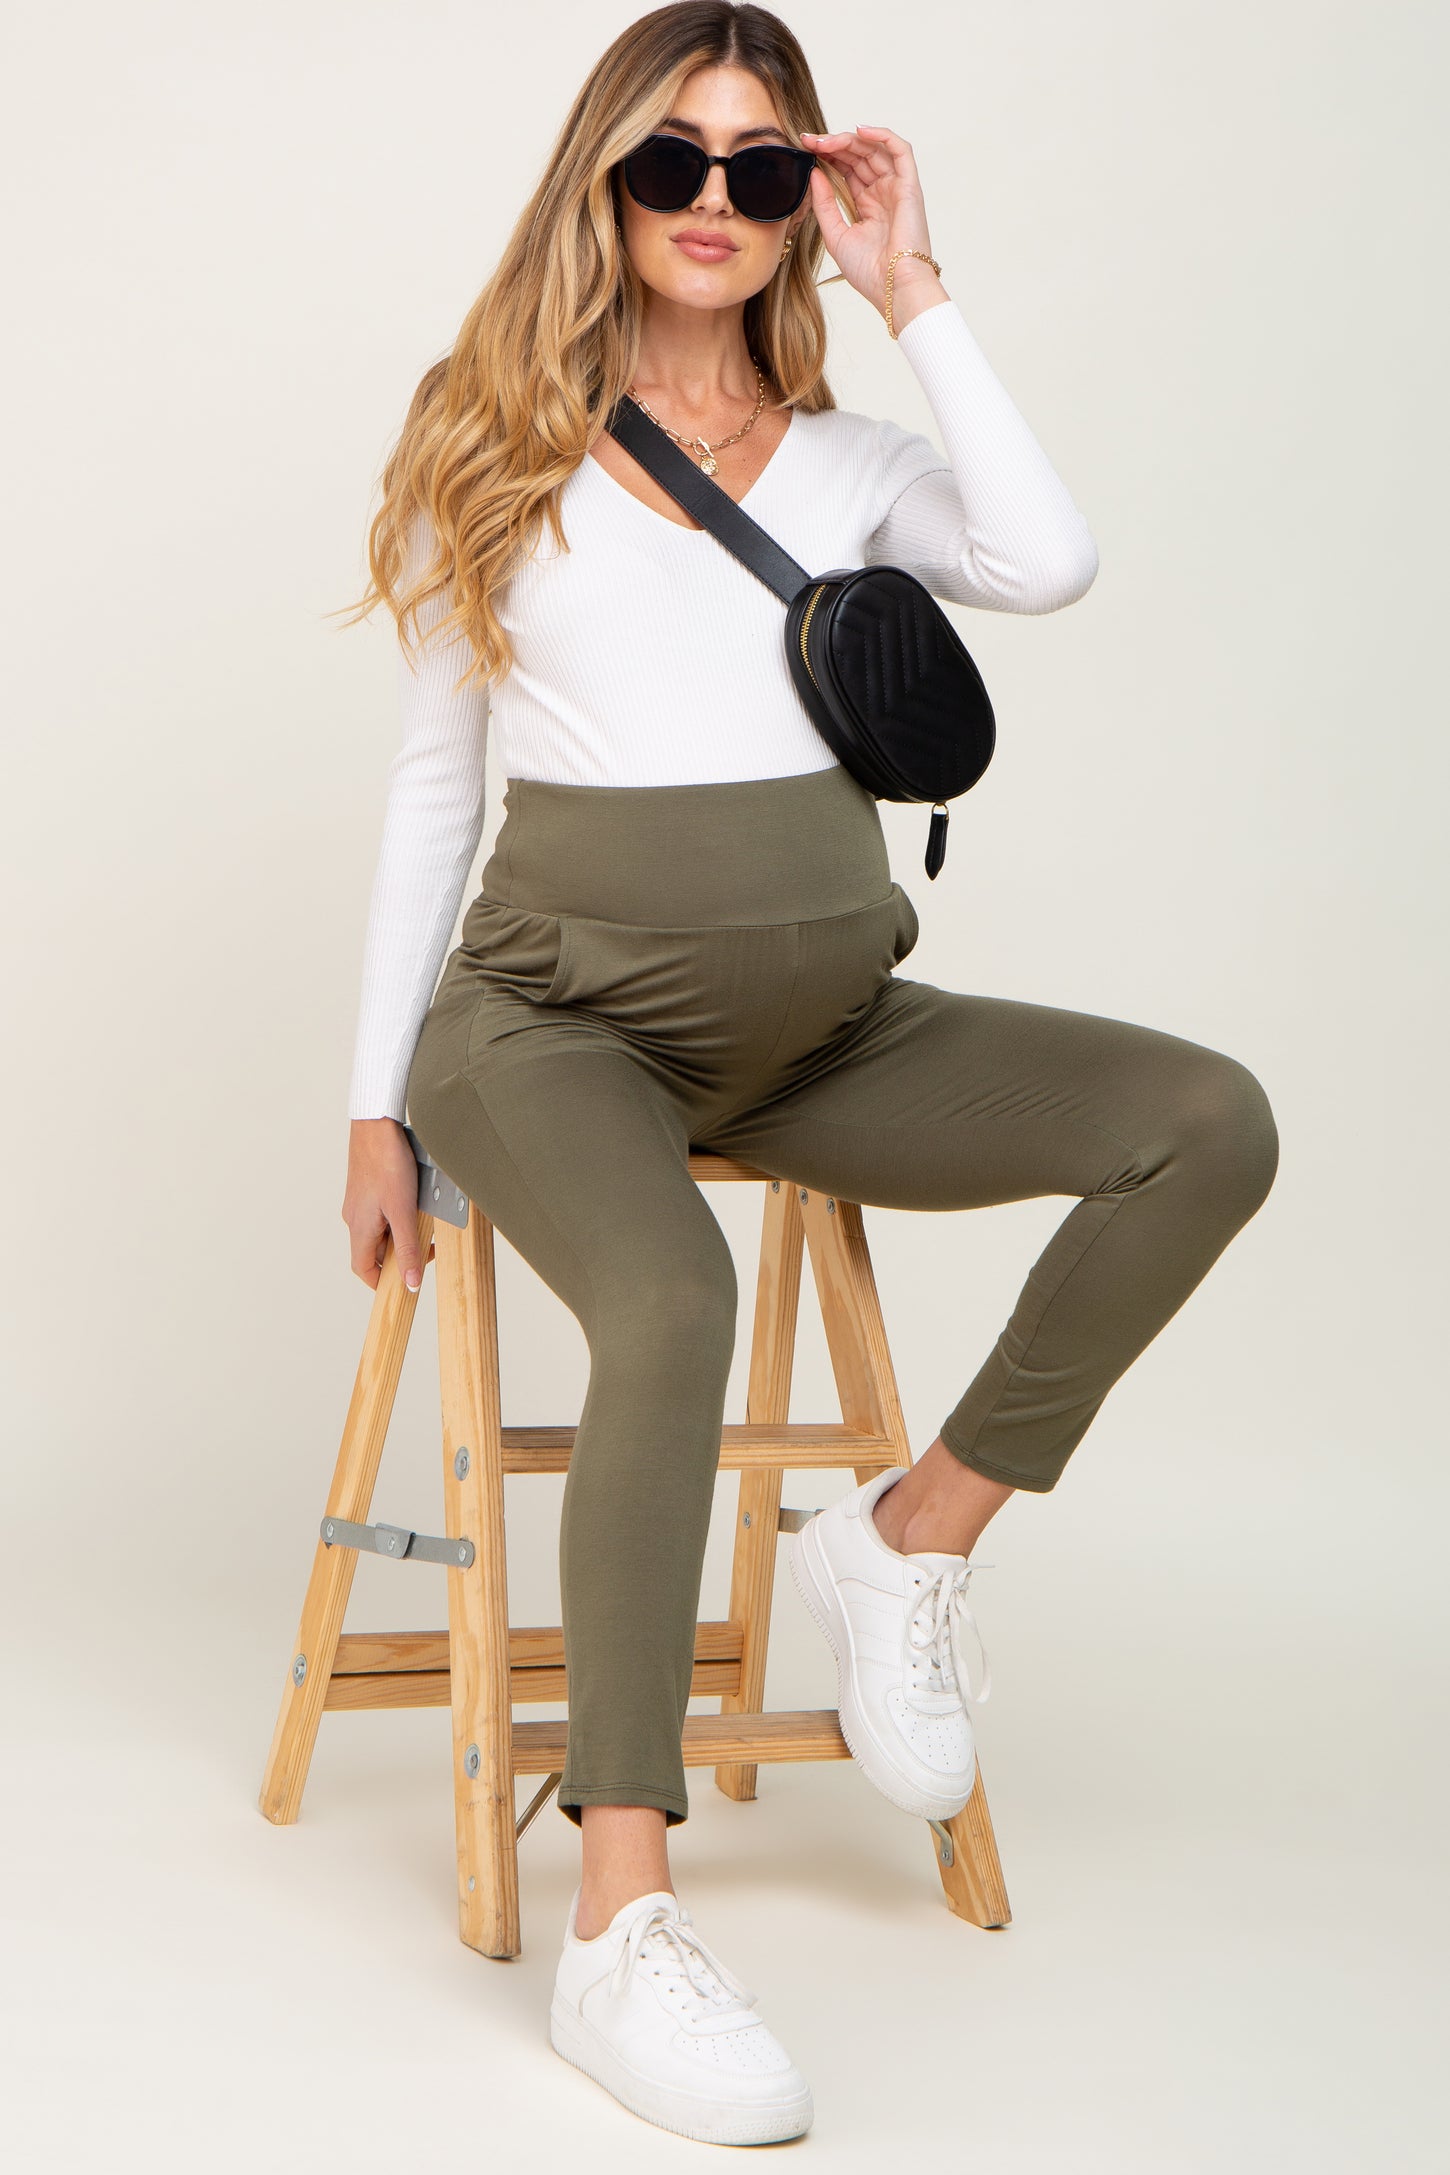 The Best Maternity Pants for Every Stage of Pregnancy - Motherhood